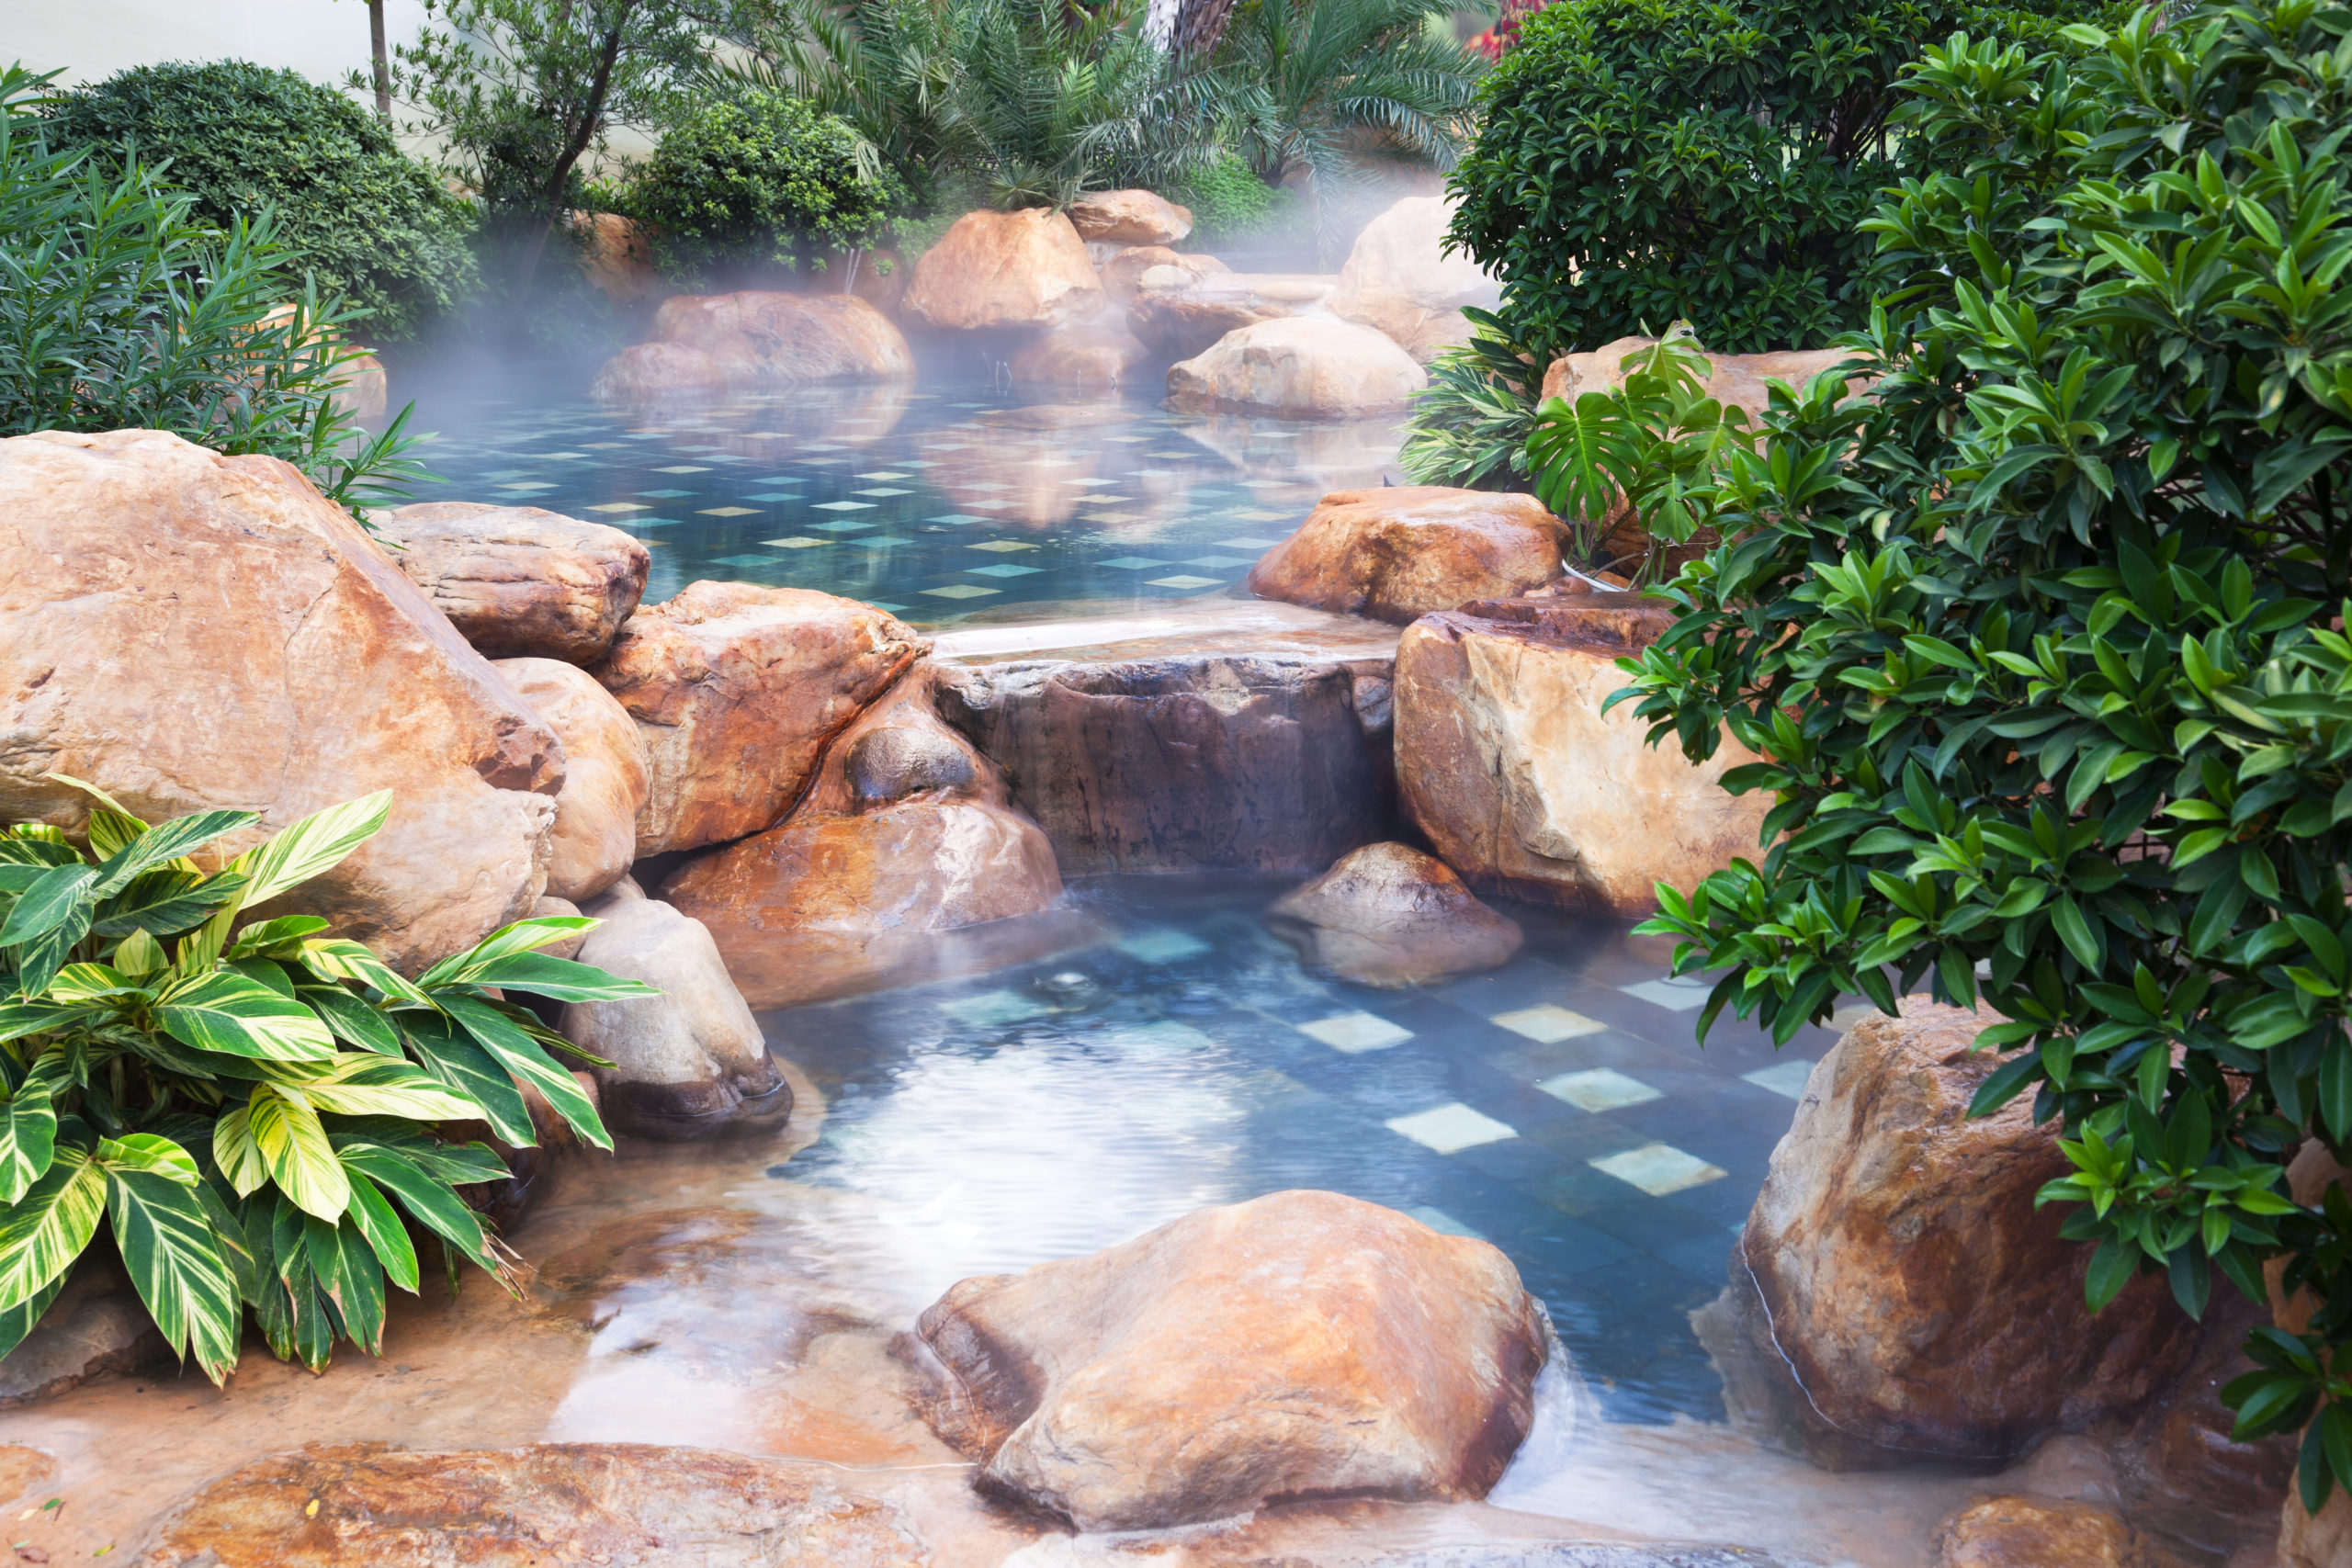 An overflowing pool with a cascading water feature, surrounded by natural rock formations, offering a picturesque and harmonious blend of water and earth elements.